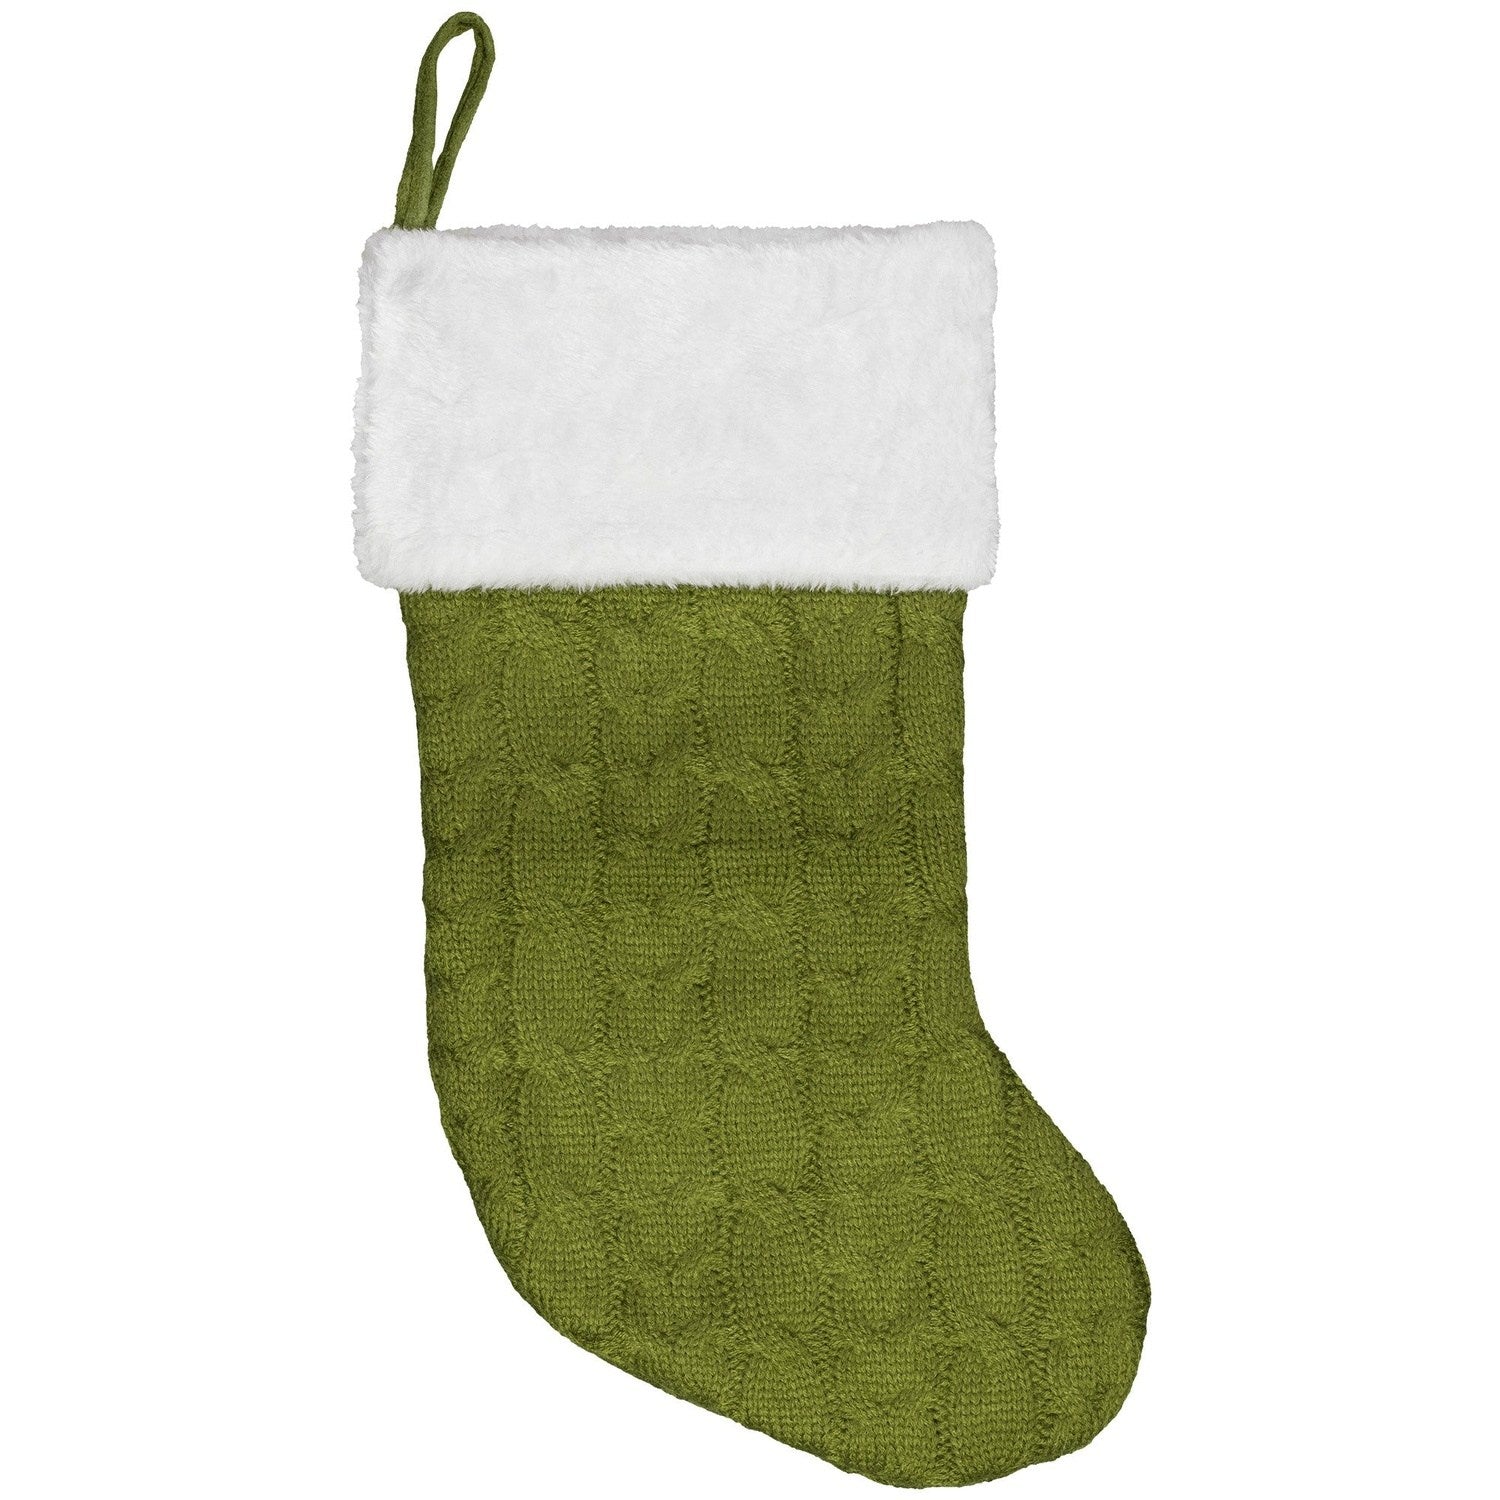 Embroidered Christmas Stocking Personalized